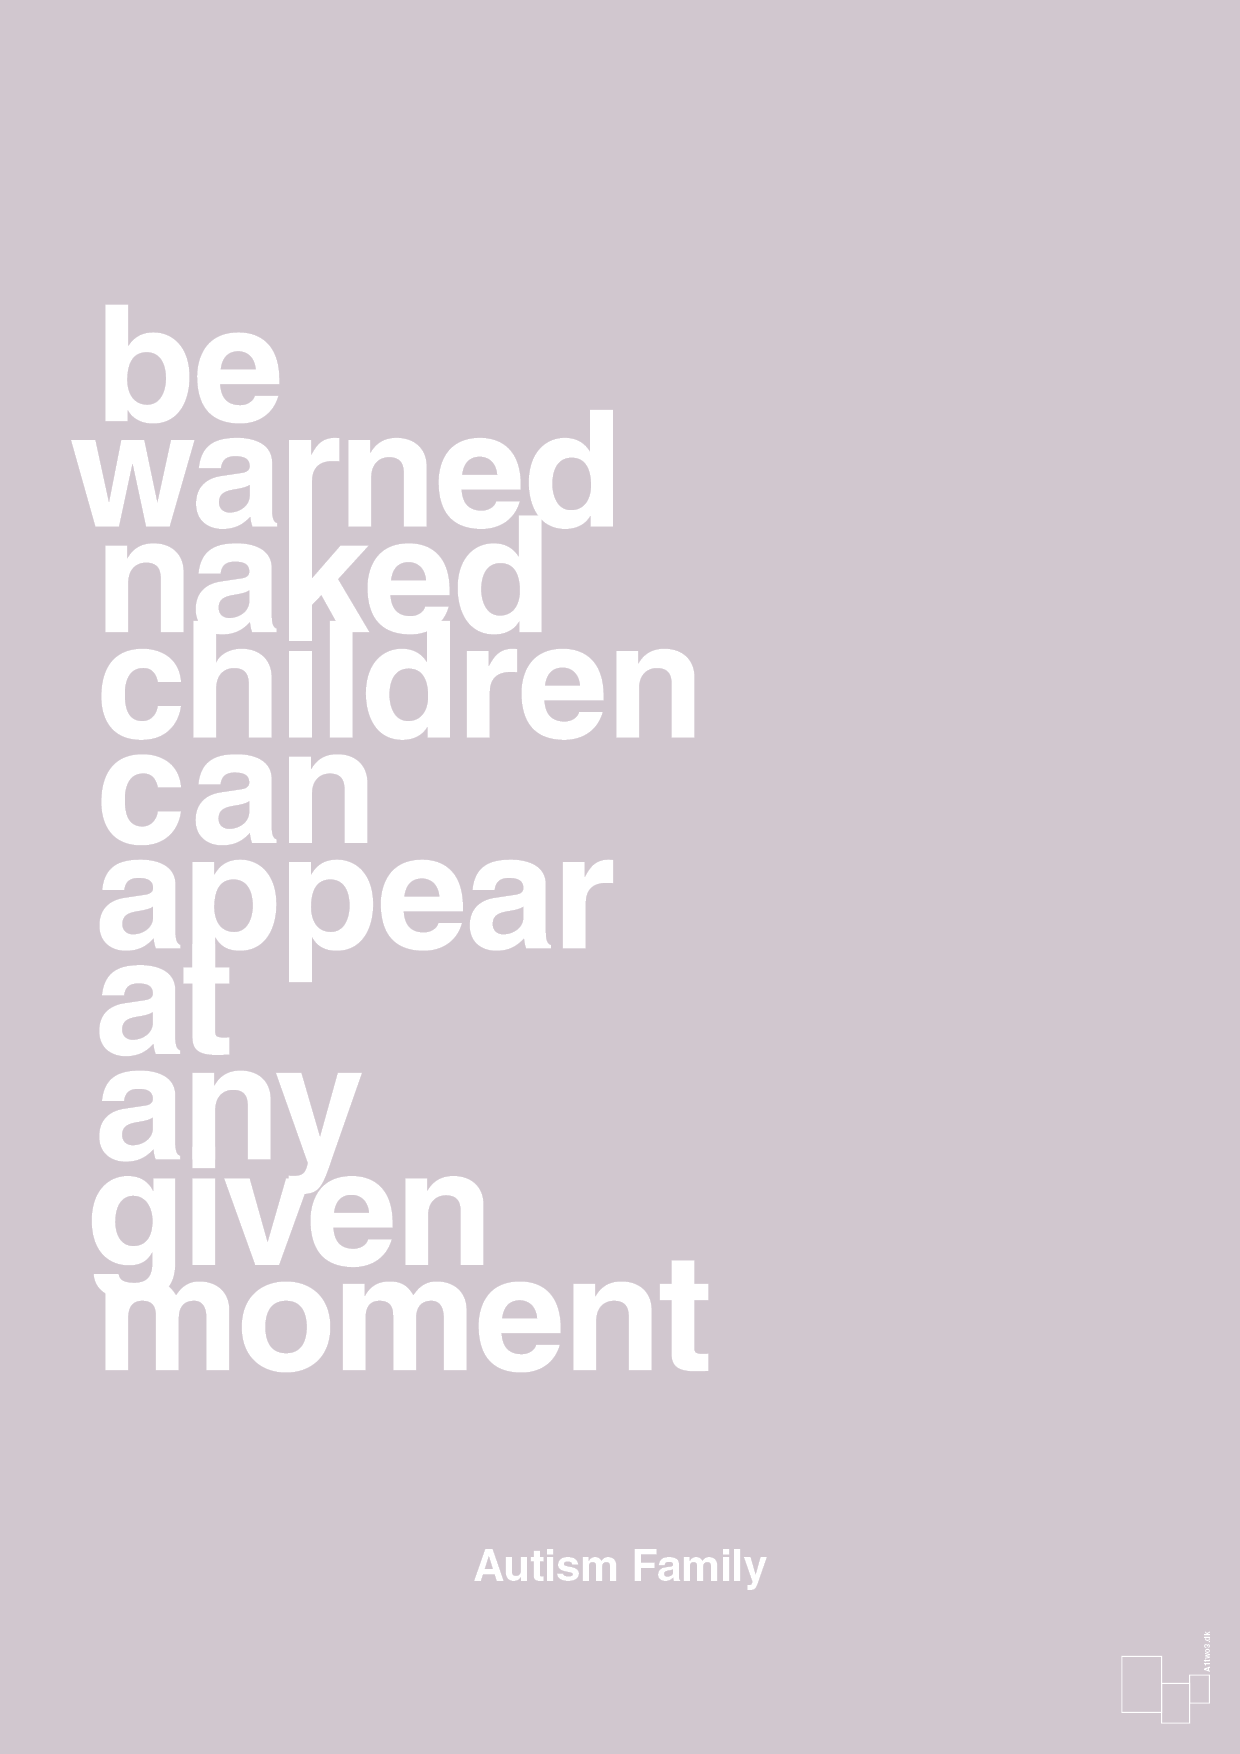 be warned naked children can appear at any given moment - Plakat med Samfund i Dusty Lilac